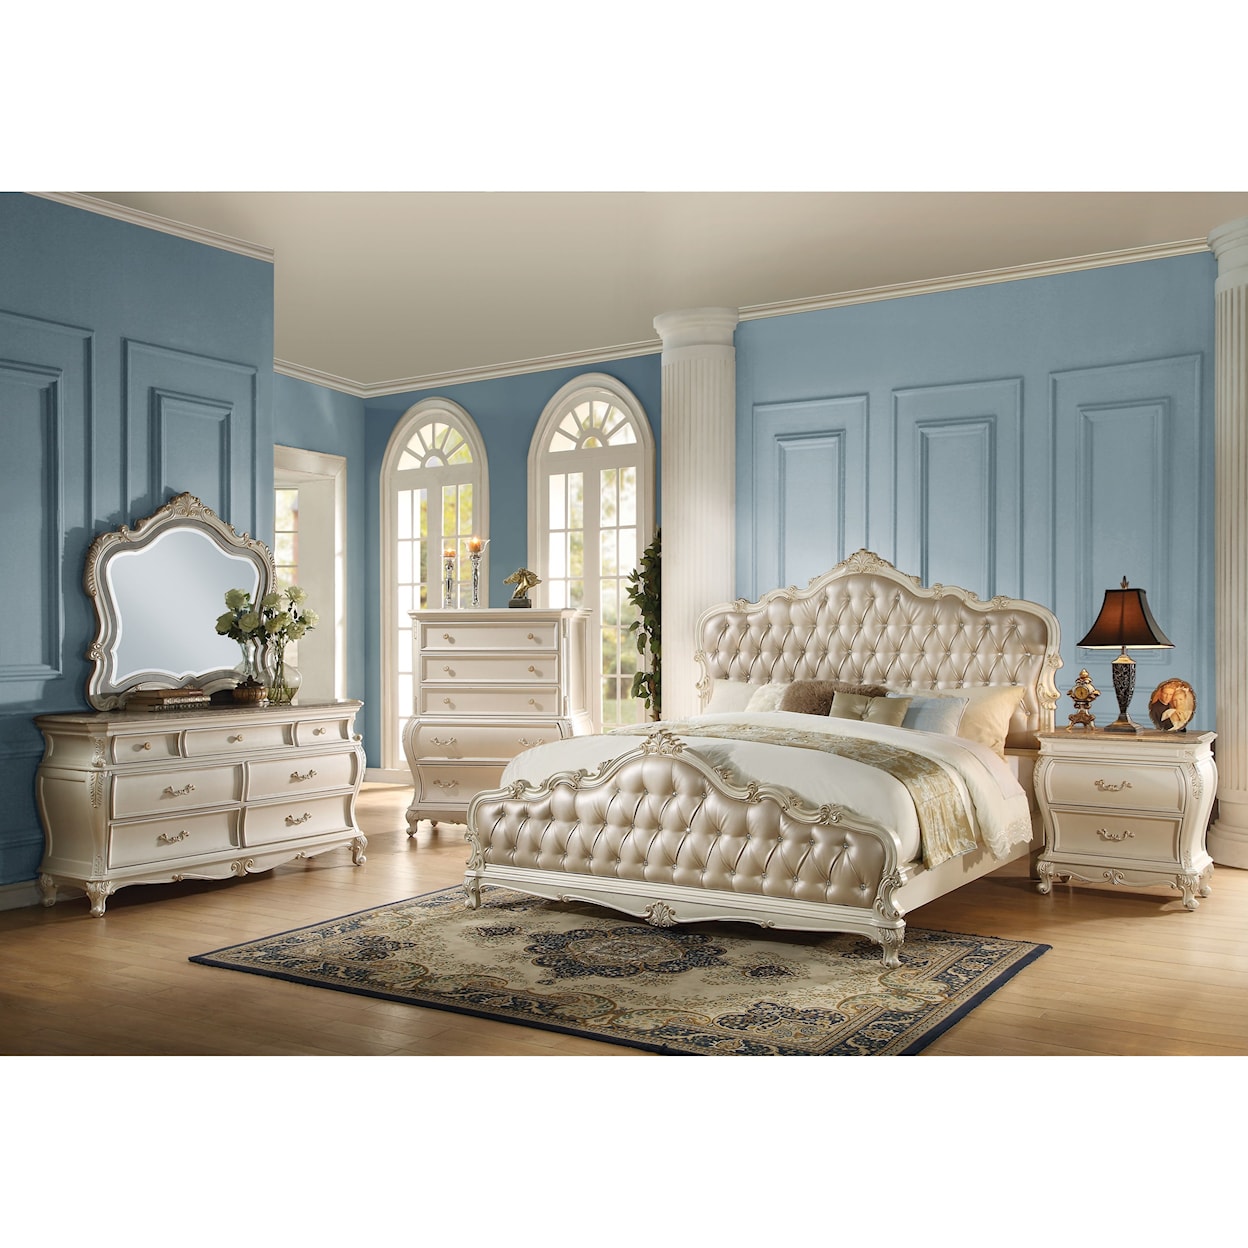 Acme Furniture Chantelle 7pc Queen Bedroom Group